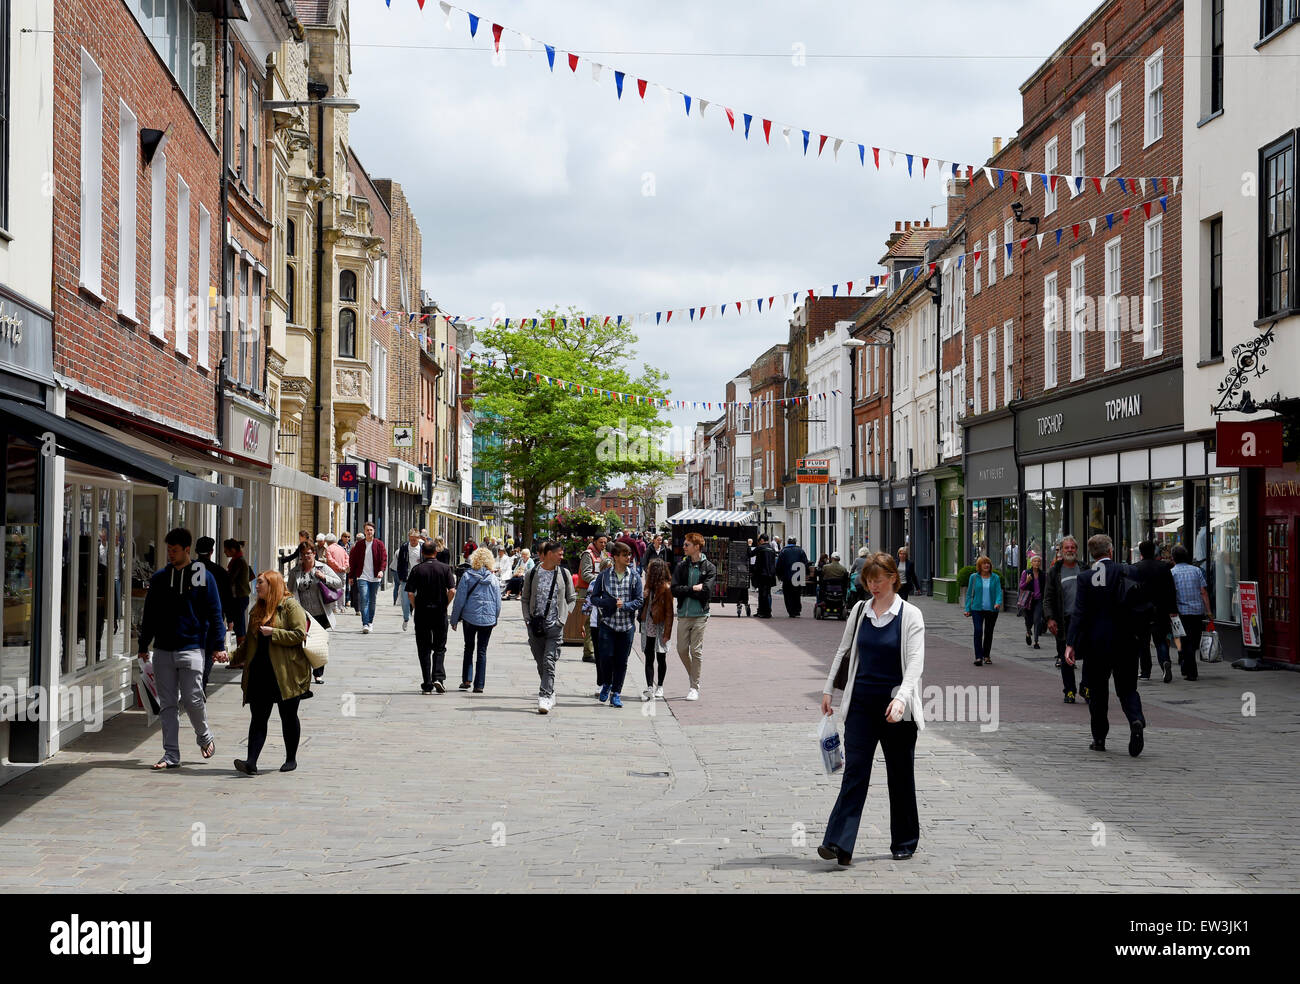 Shoppers in East Street Chichester viewed form the Market Cross West Sussex England UK Stock Photo